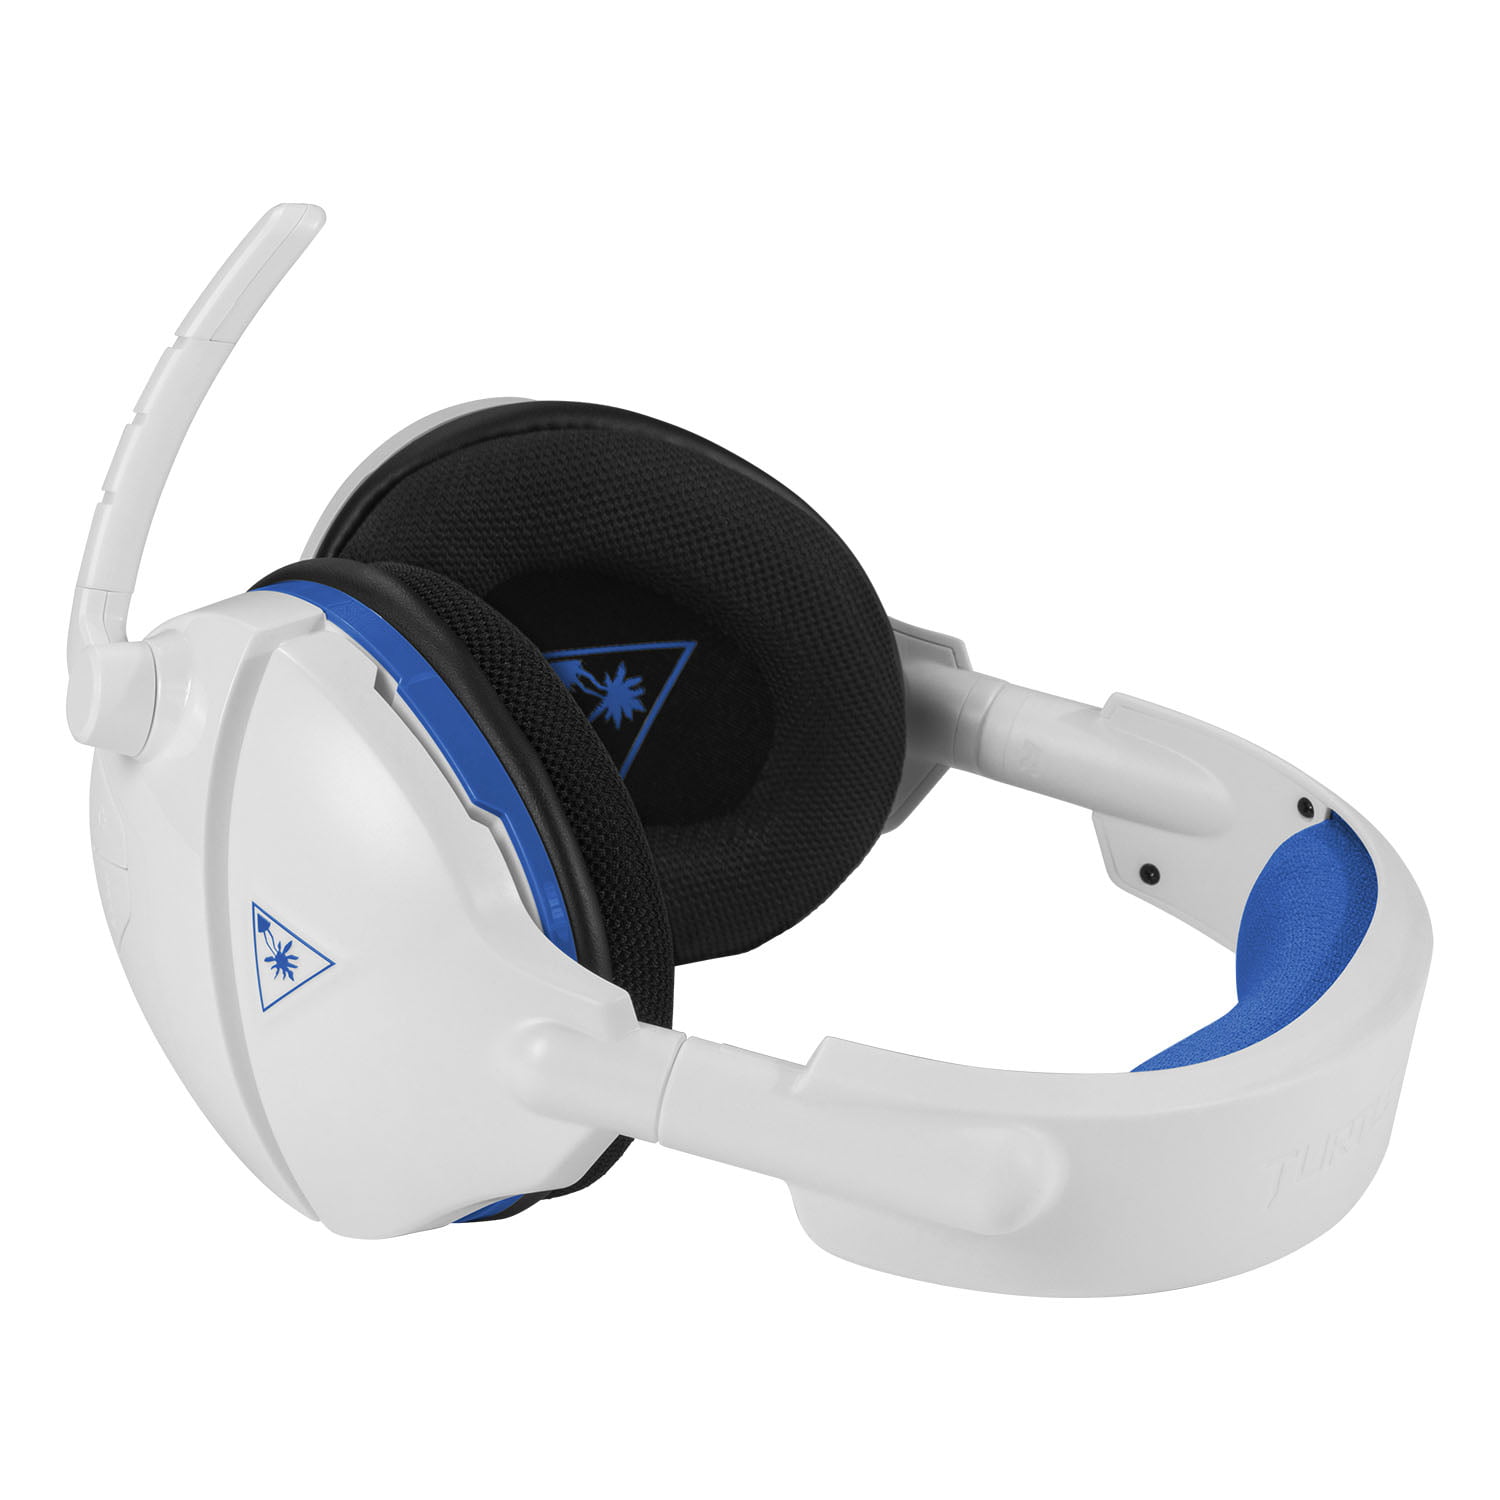 Turtle Beach 600 Wireless Gaming Headset for PC (White) -